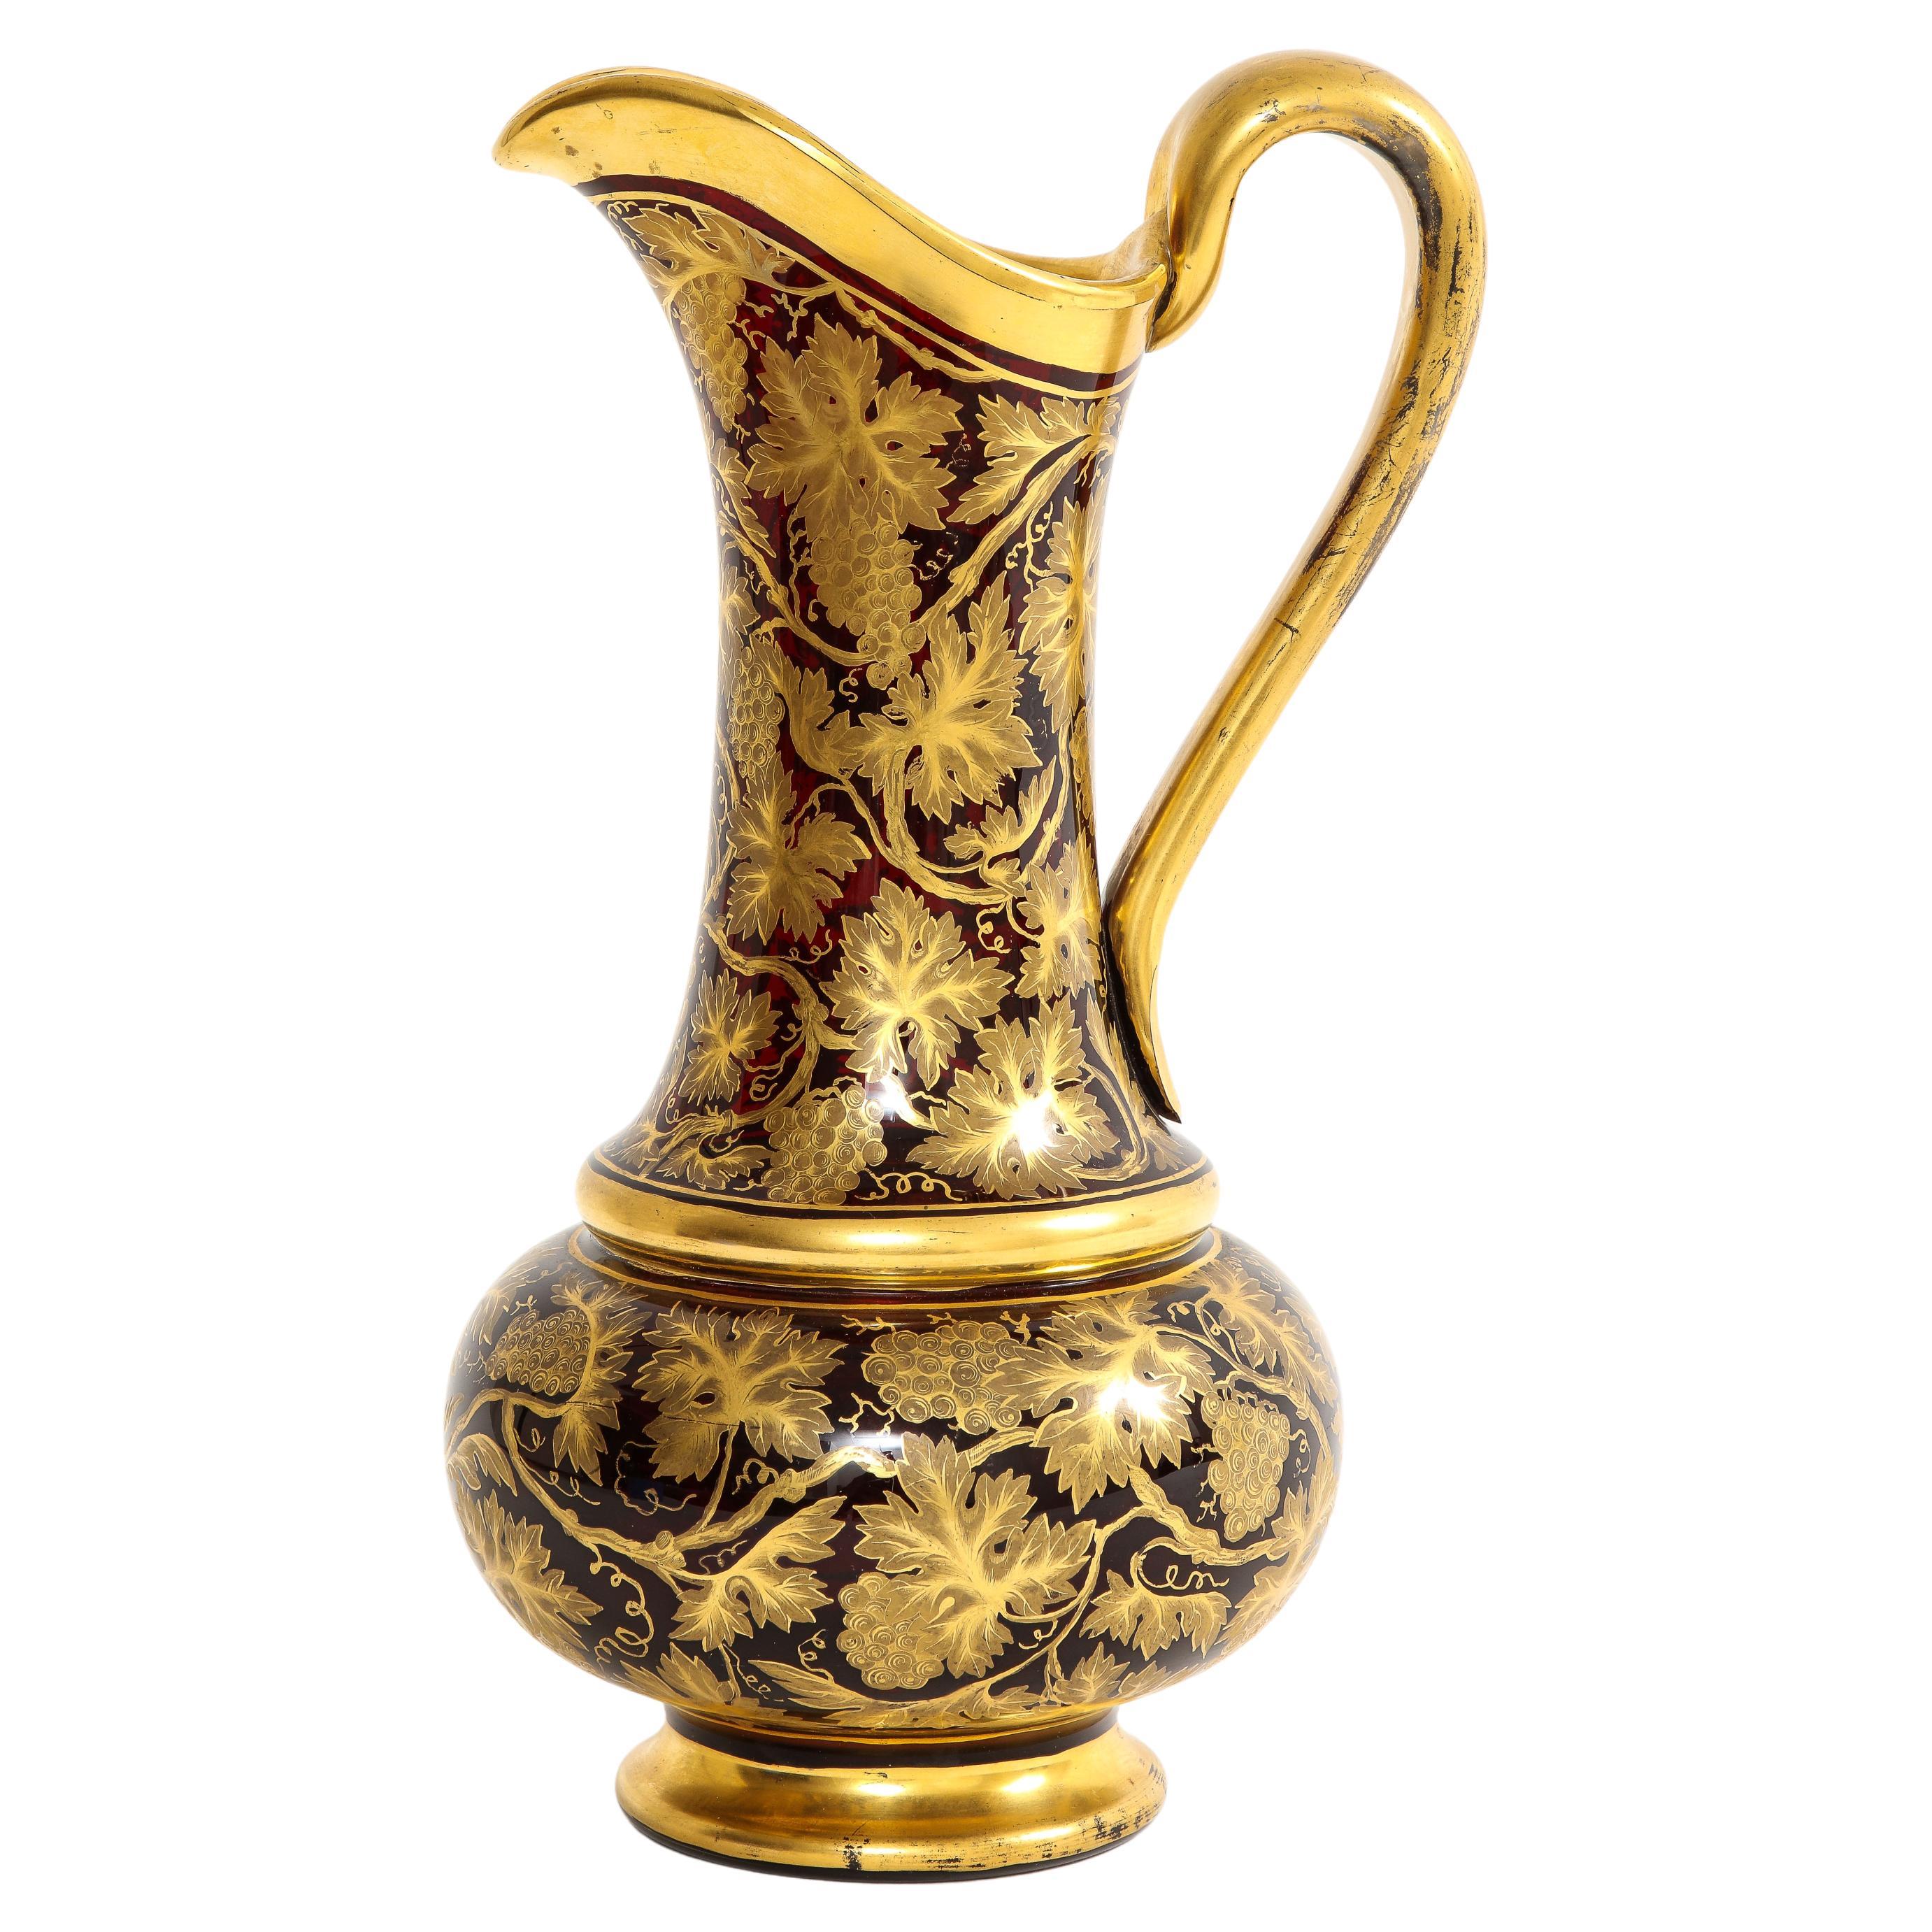 Marvelous 19th Century Bohemian Red Crystal & 24k Gold Decorated Ewer For Sale